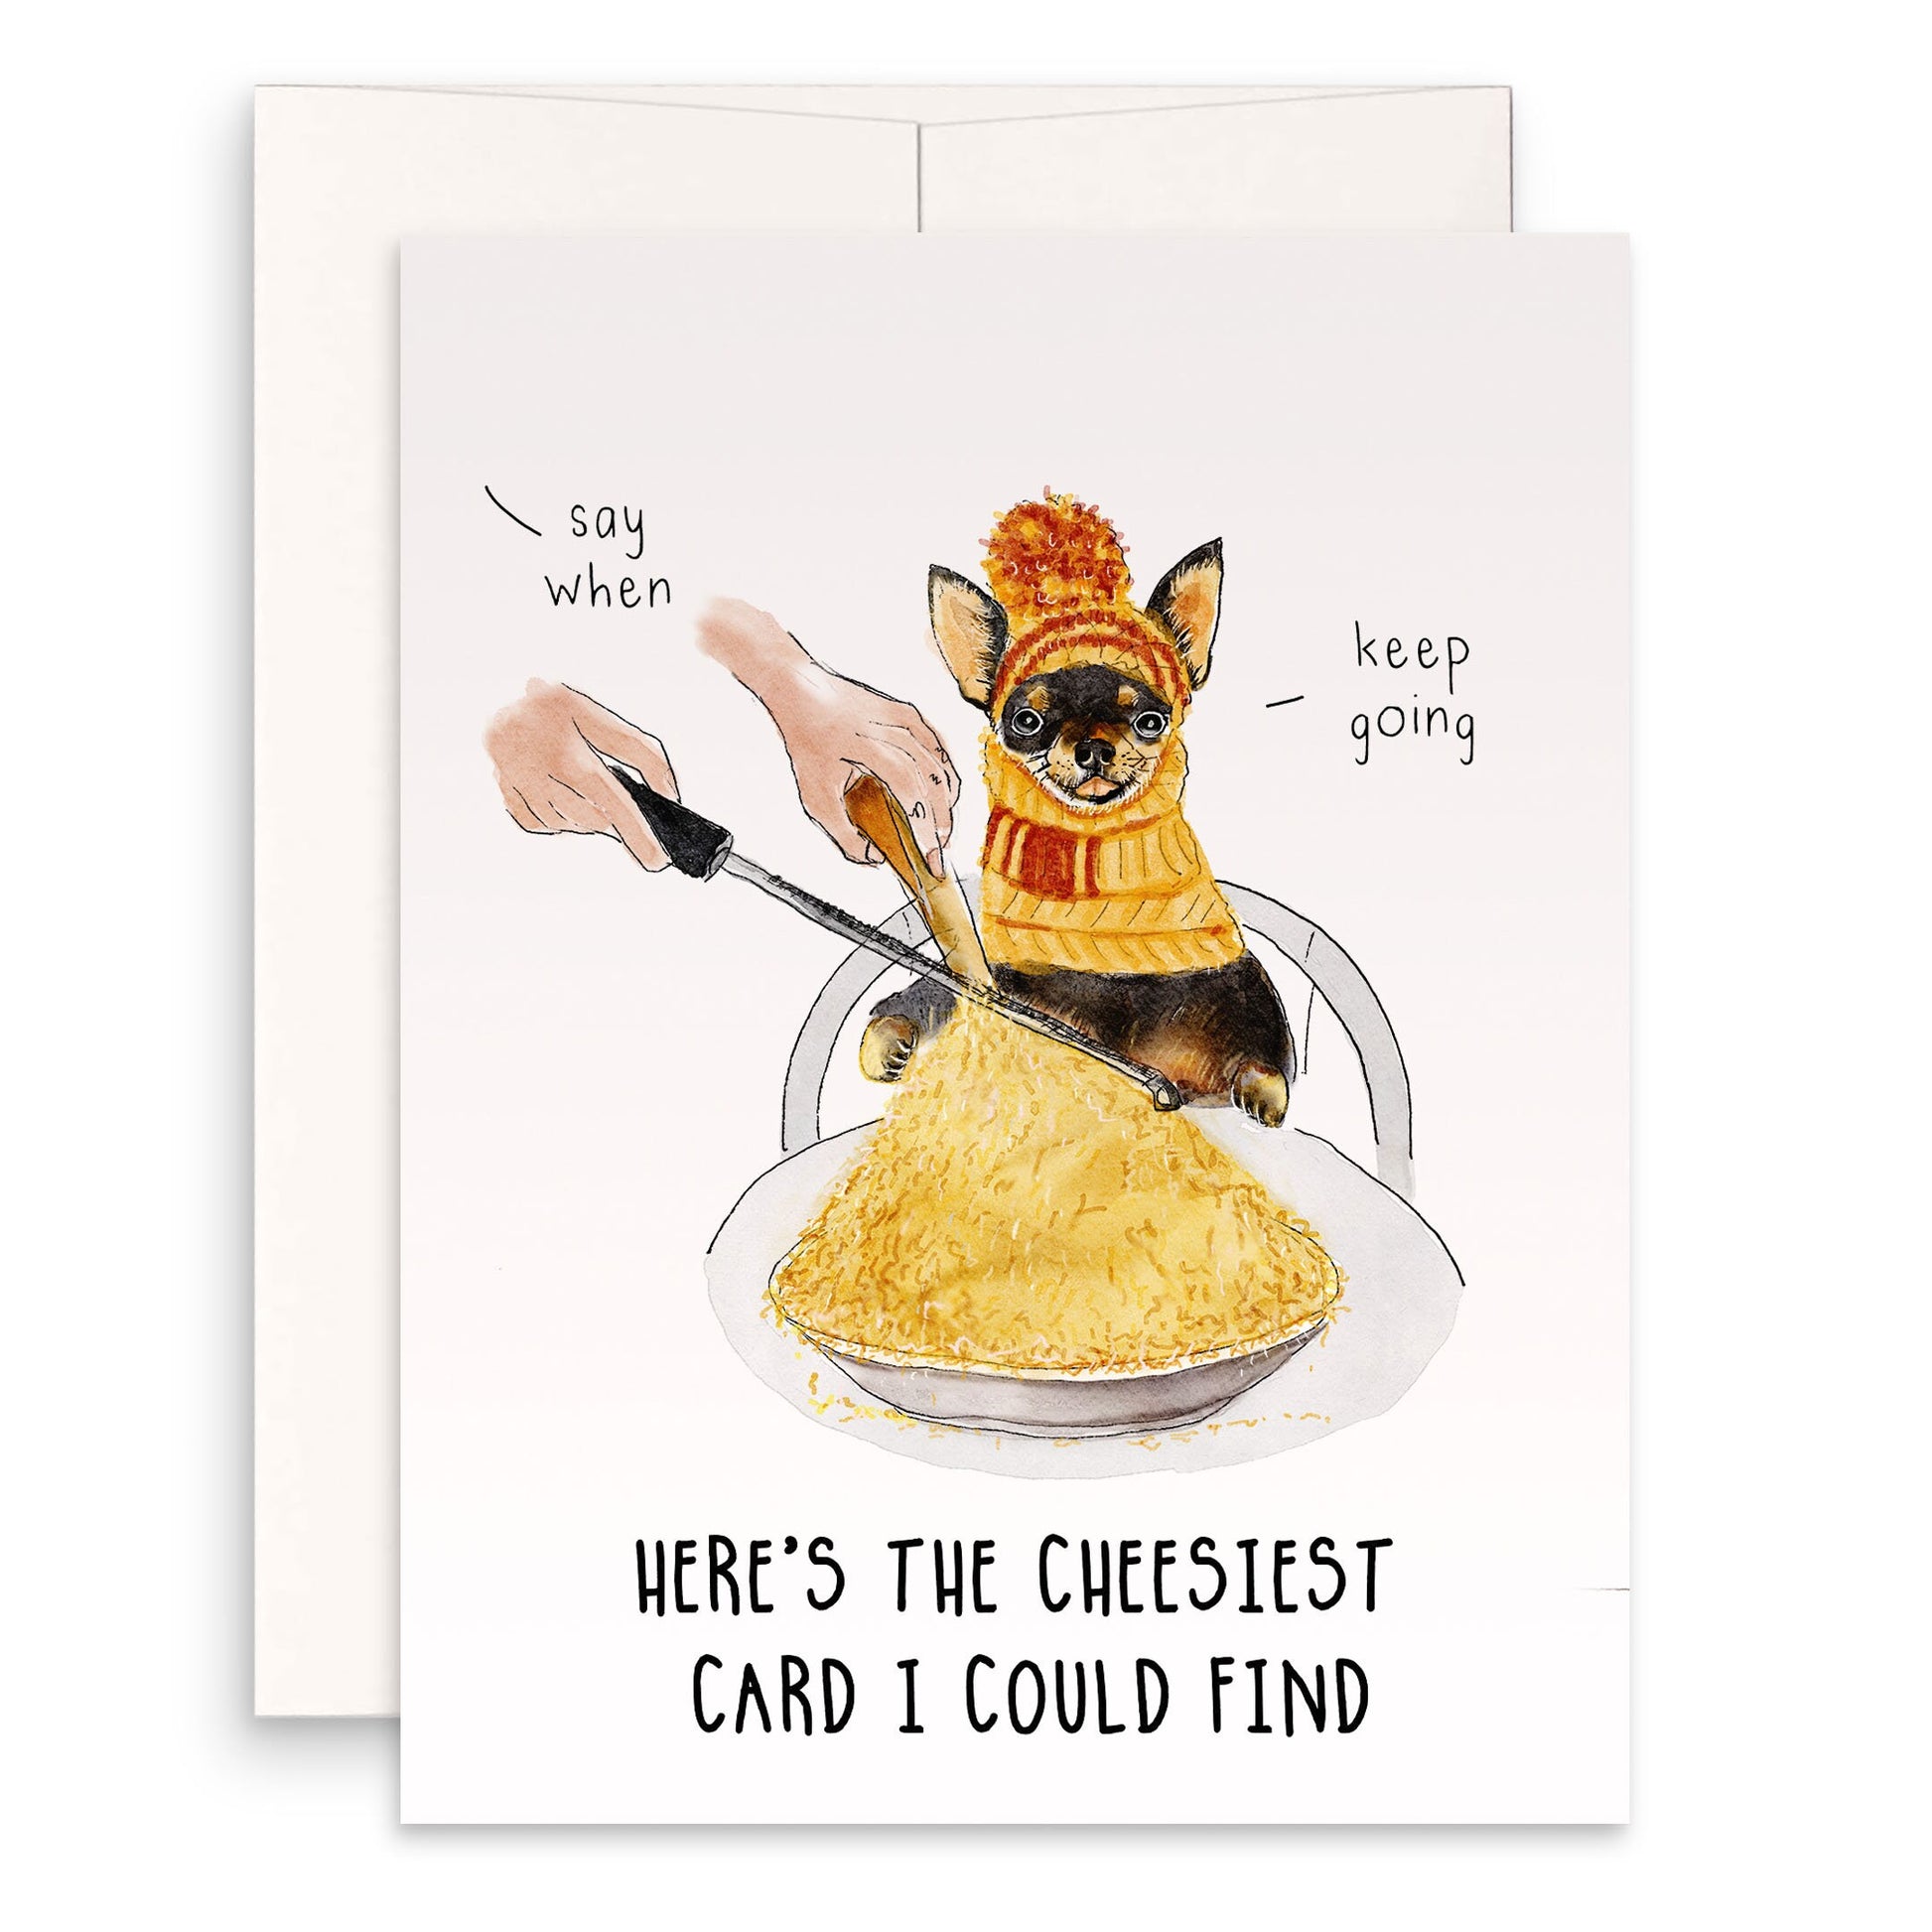 Cheese Chihuahua Dog Valentine Card For Him - Cheesy Funny Love Card For Husband - Funny Greeting Cards handmade By Liyana Studio